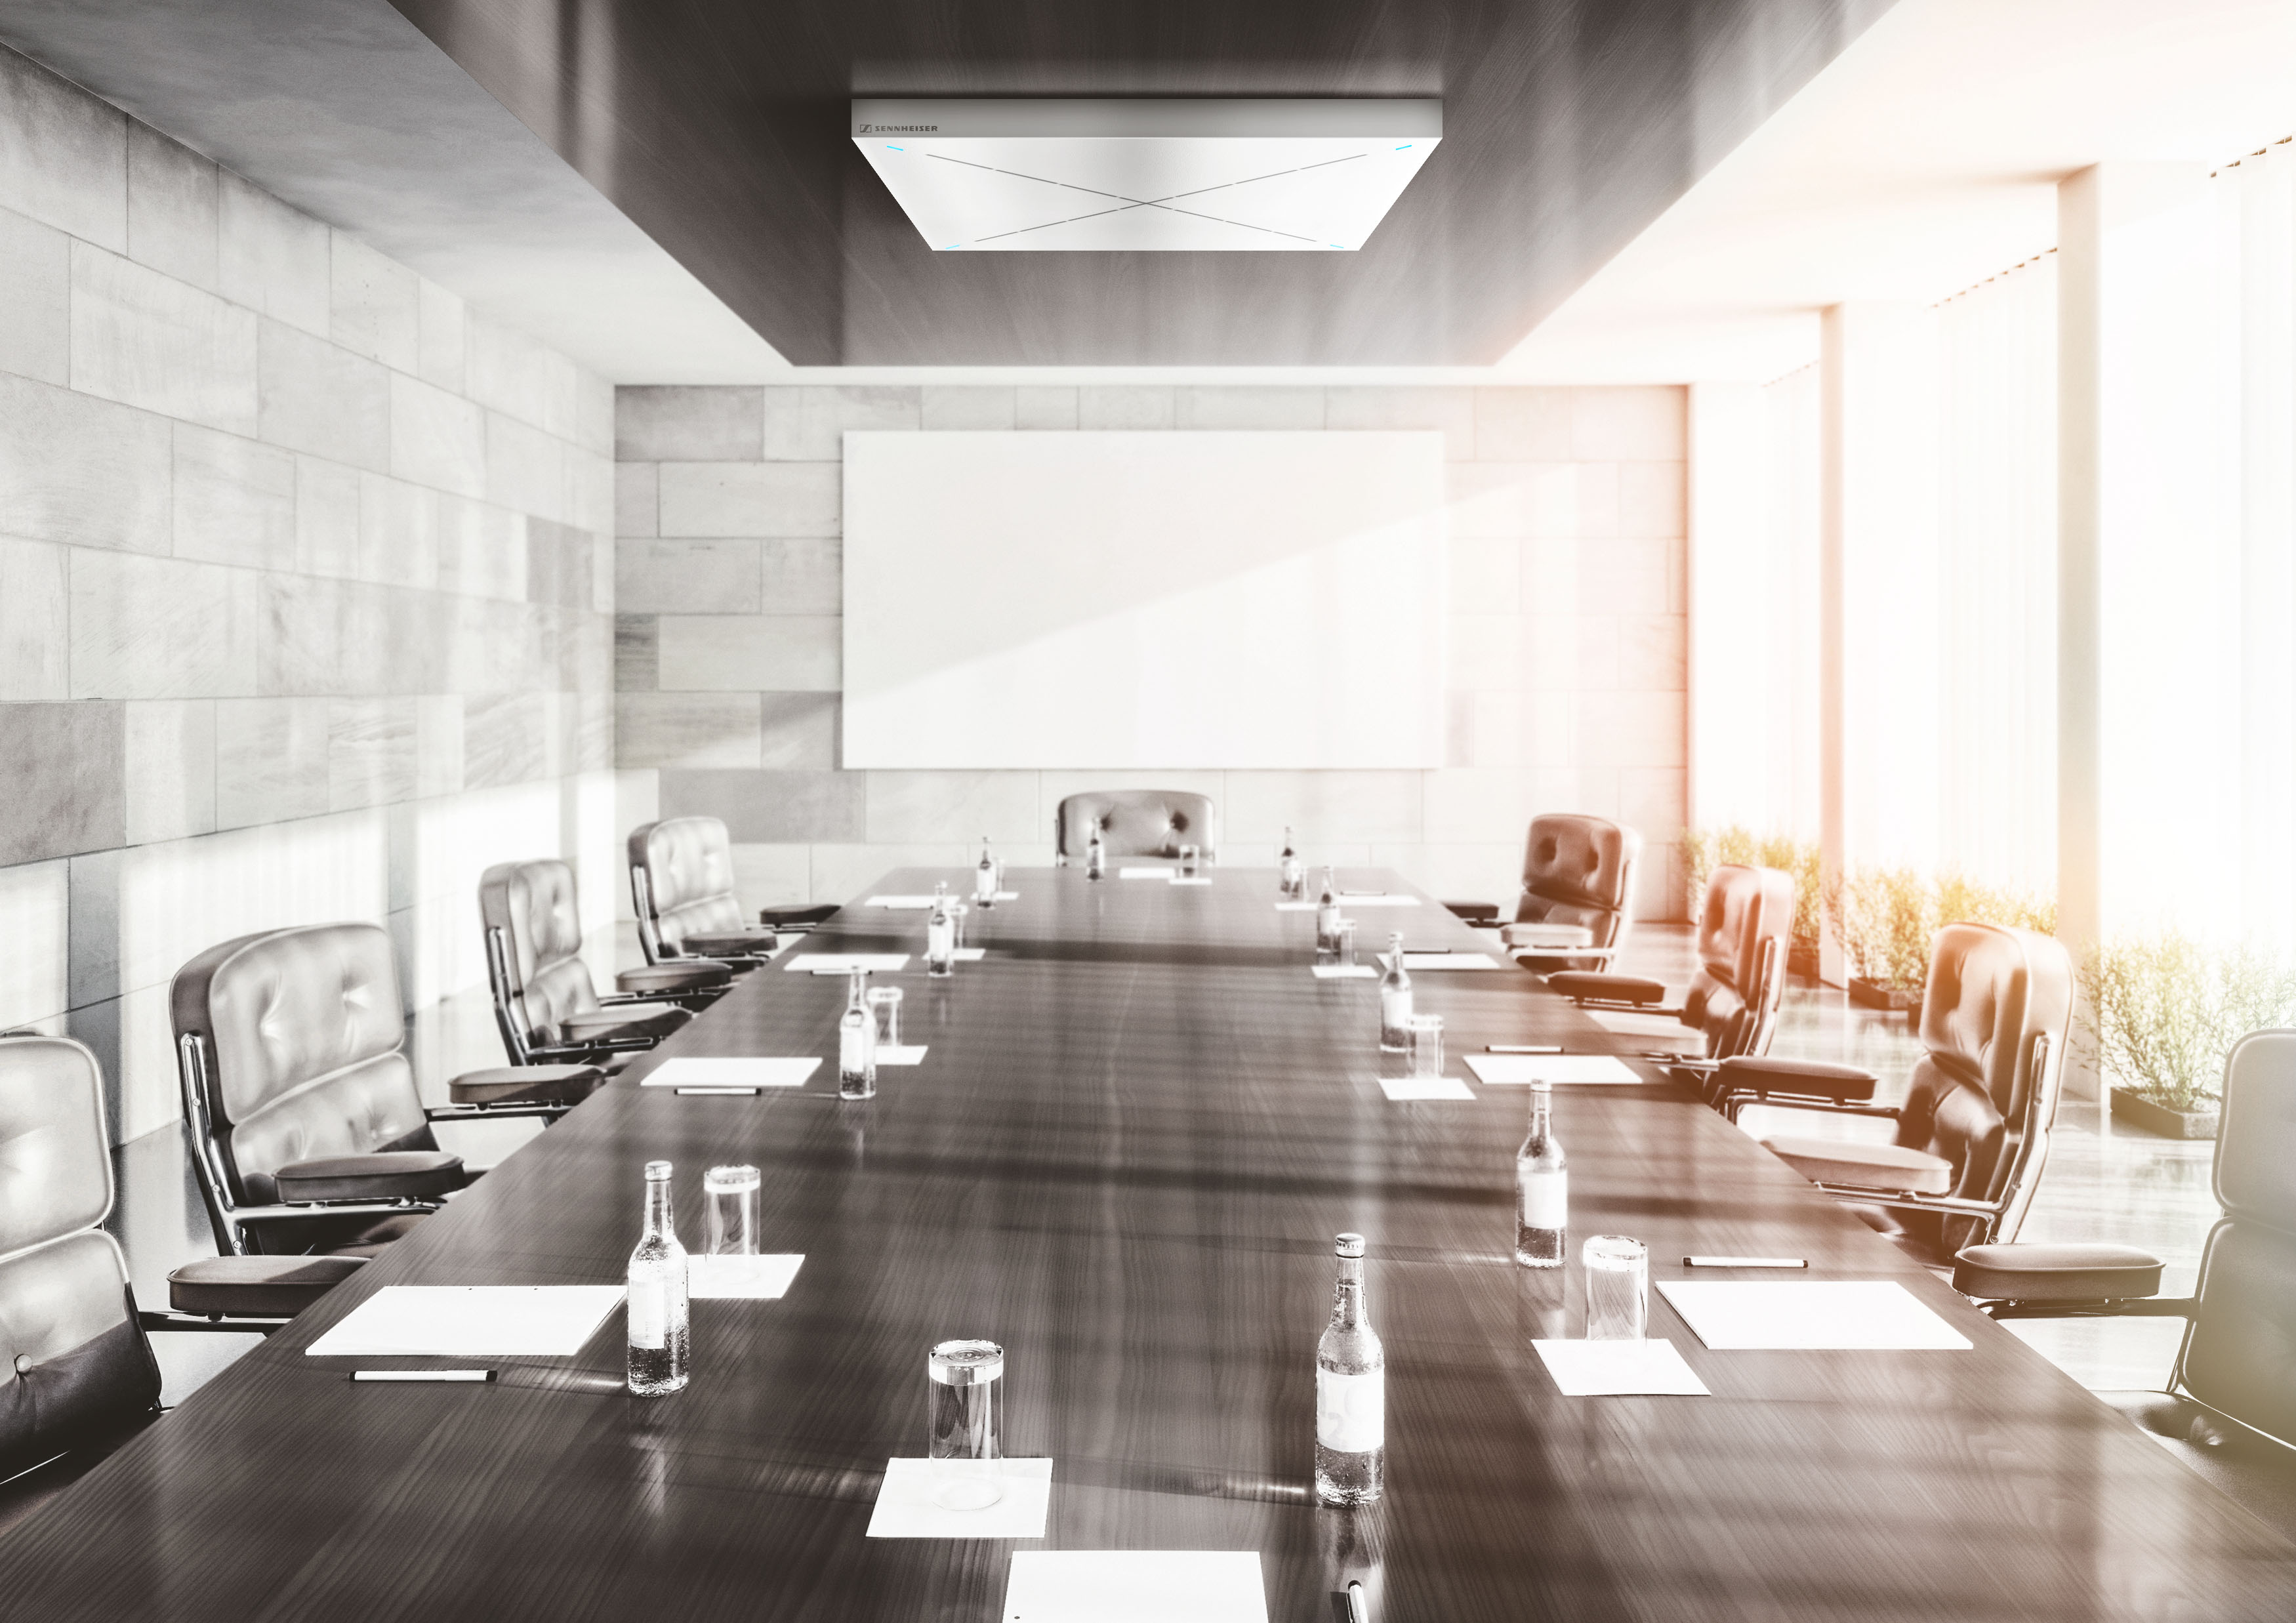 Complete freedom of movement and excellent speech intelligibility: TeamConnect Ceiling is the only conference room solution that works with automatic beamforming